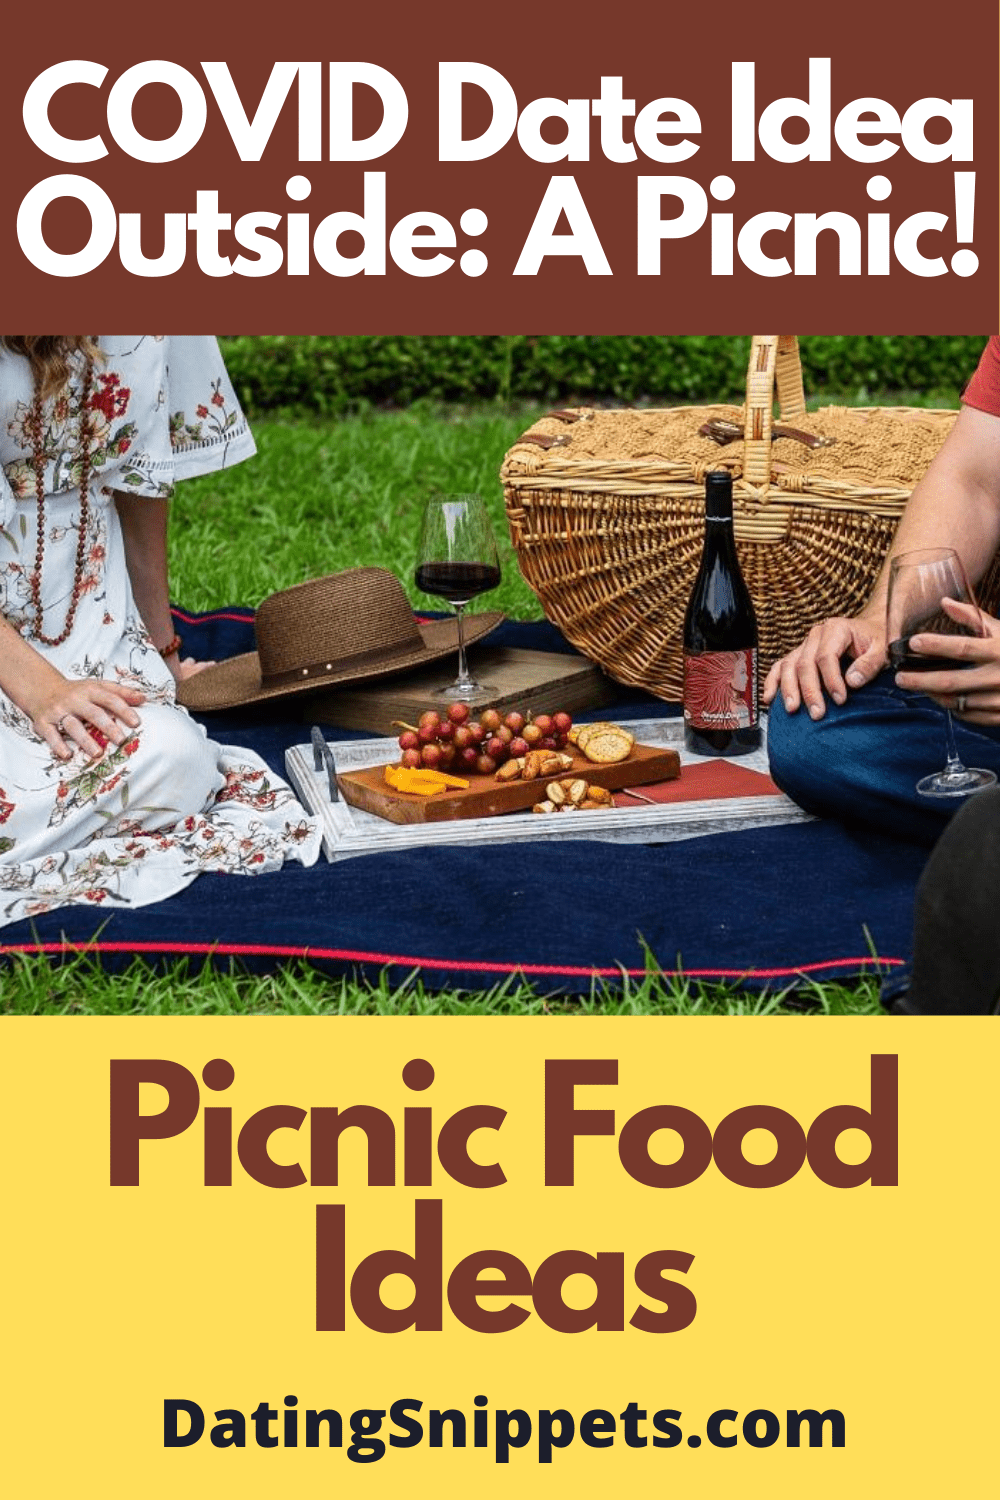 covid date ideas nyc and covid outdoor picnic date with picnic foods and picnic essentials to pack from Dating Snippets